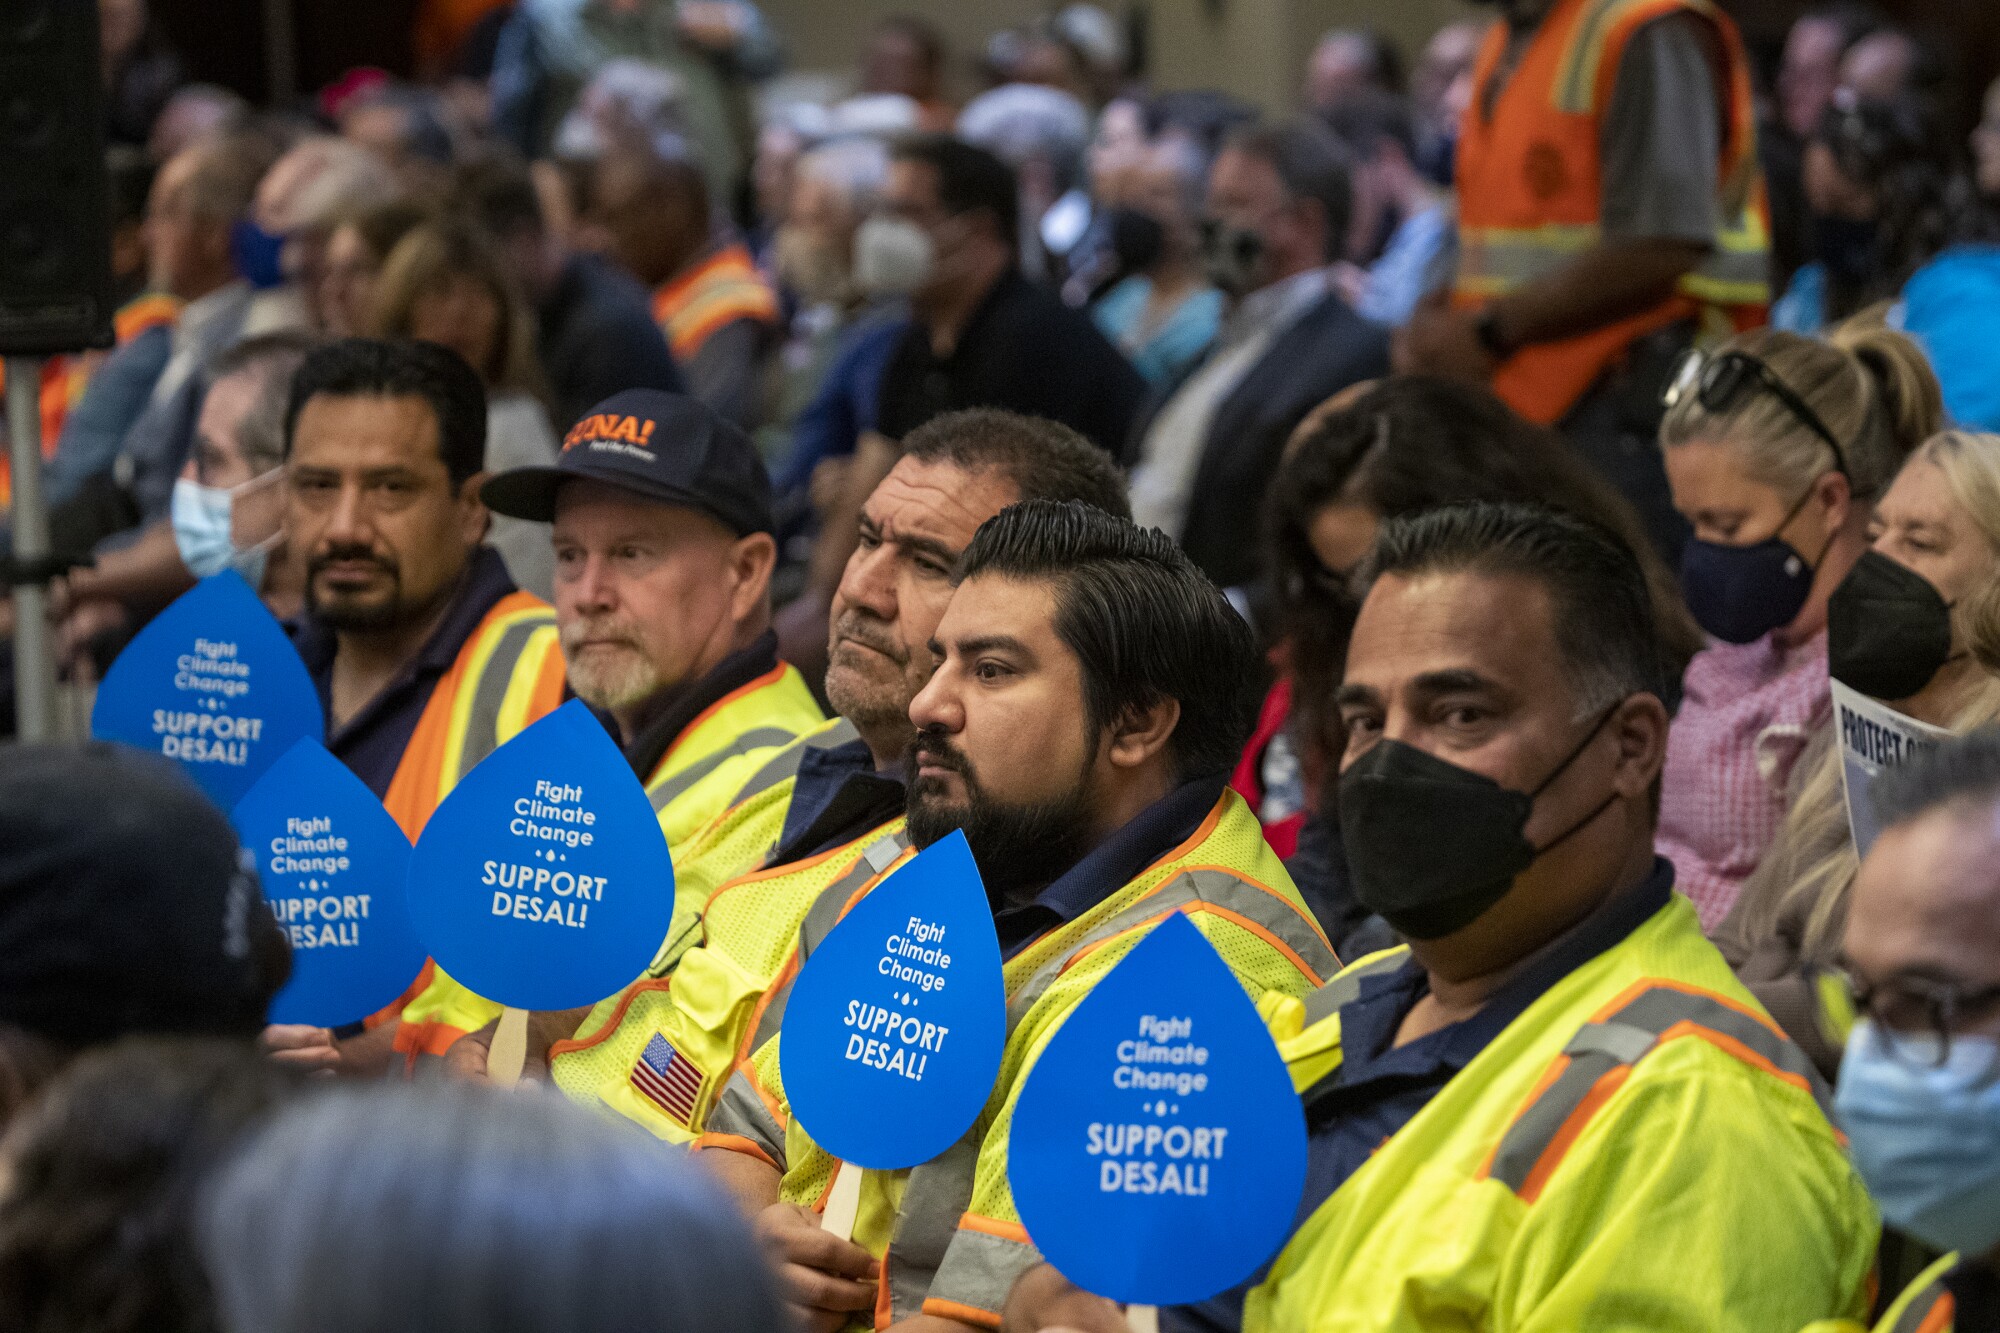 Union workers supporting the Poseidon Water desalination project are showing signs of support 